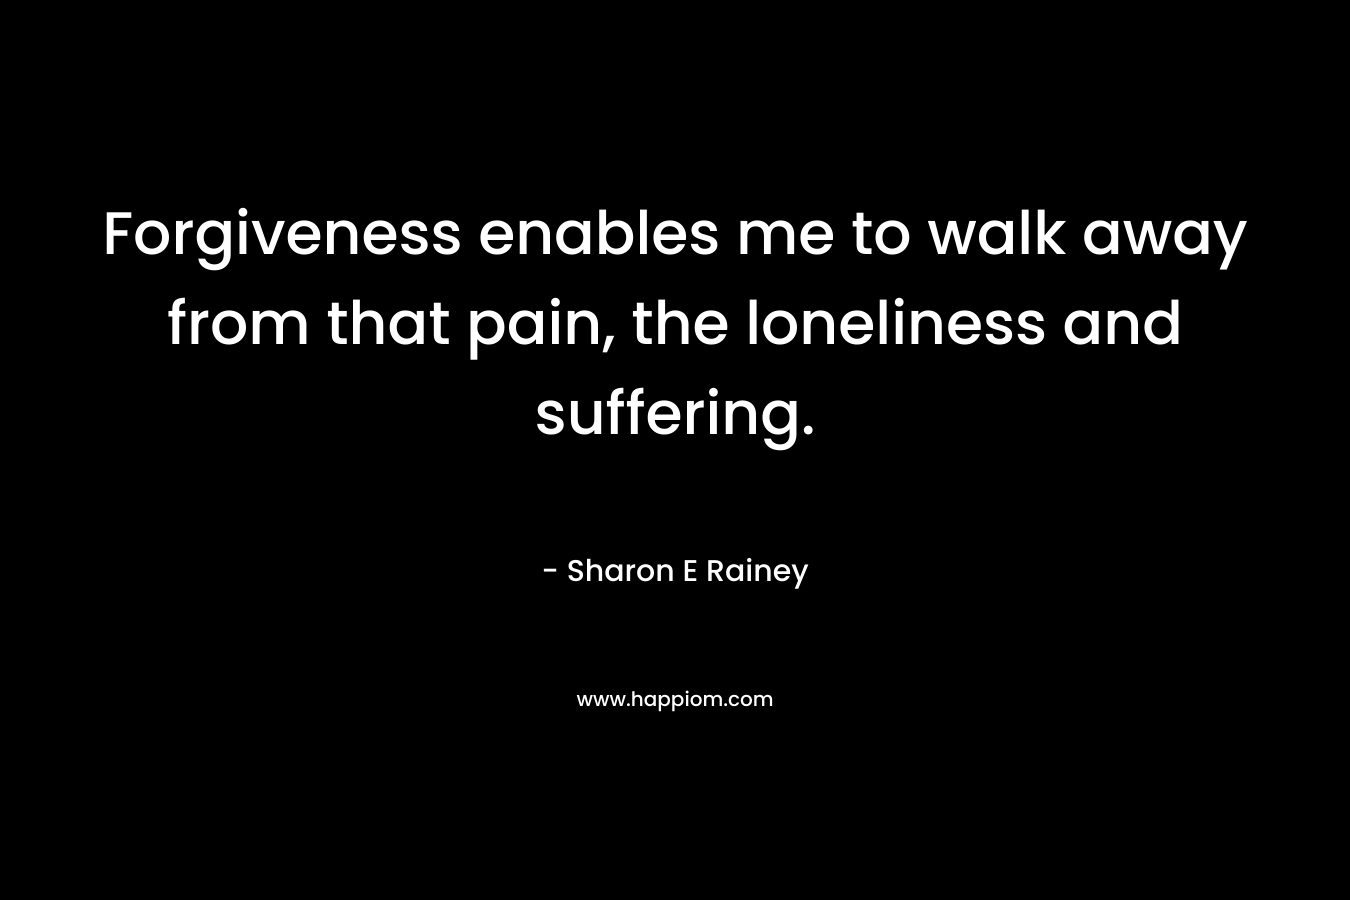 Forgiveness enables me to walk away from that pain, the loneliness and suffering. – Sharon E Rainey